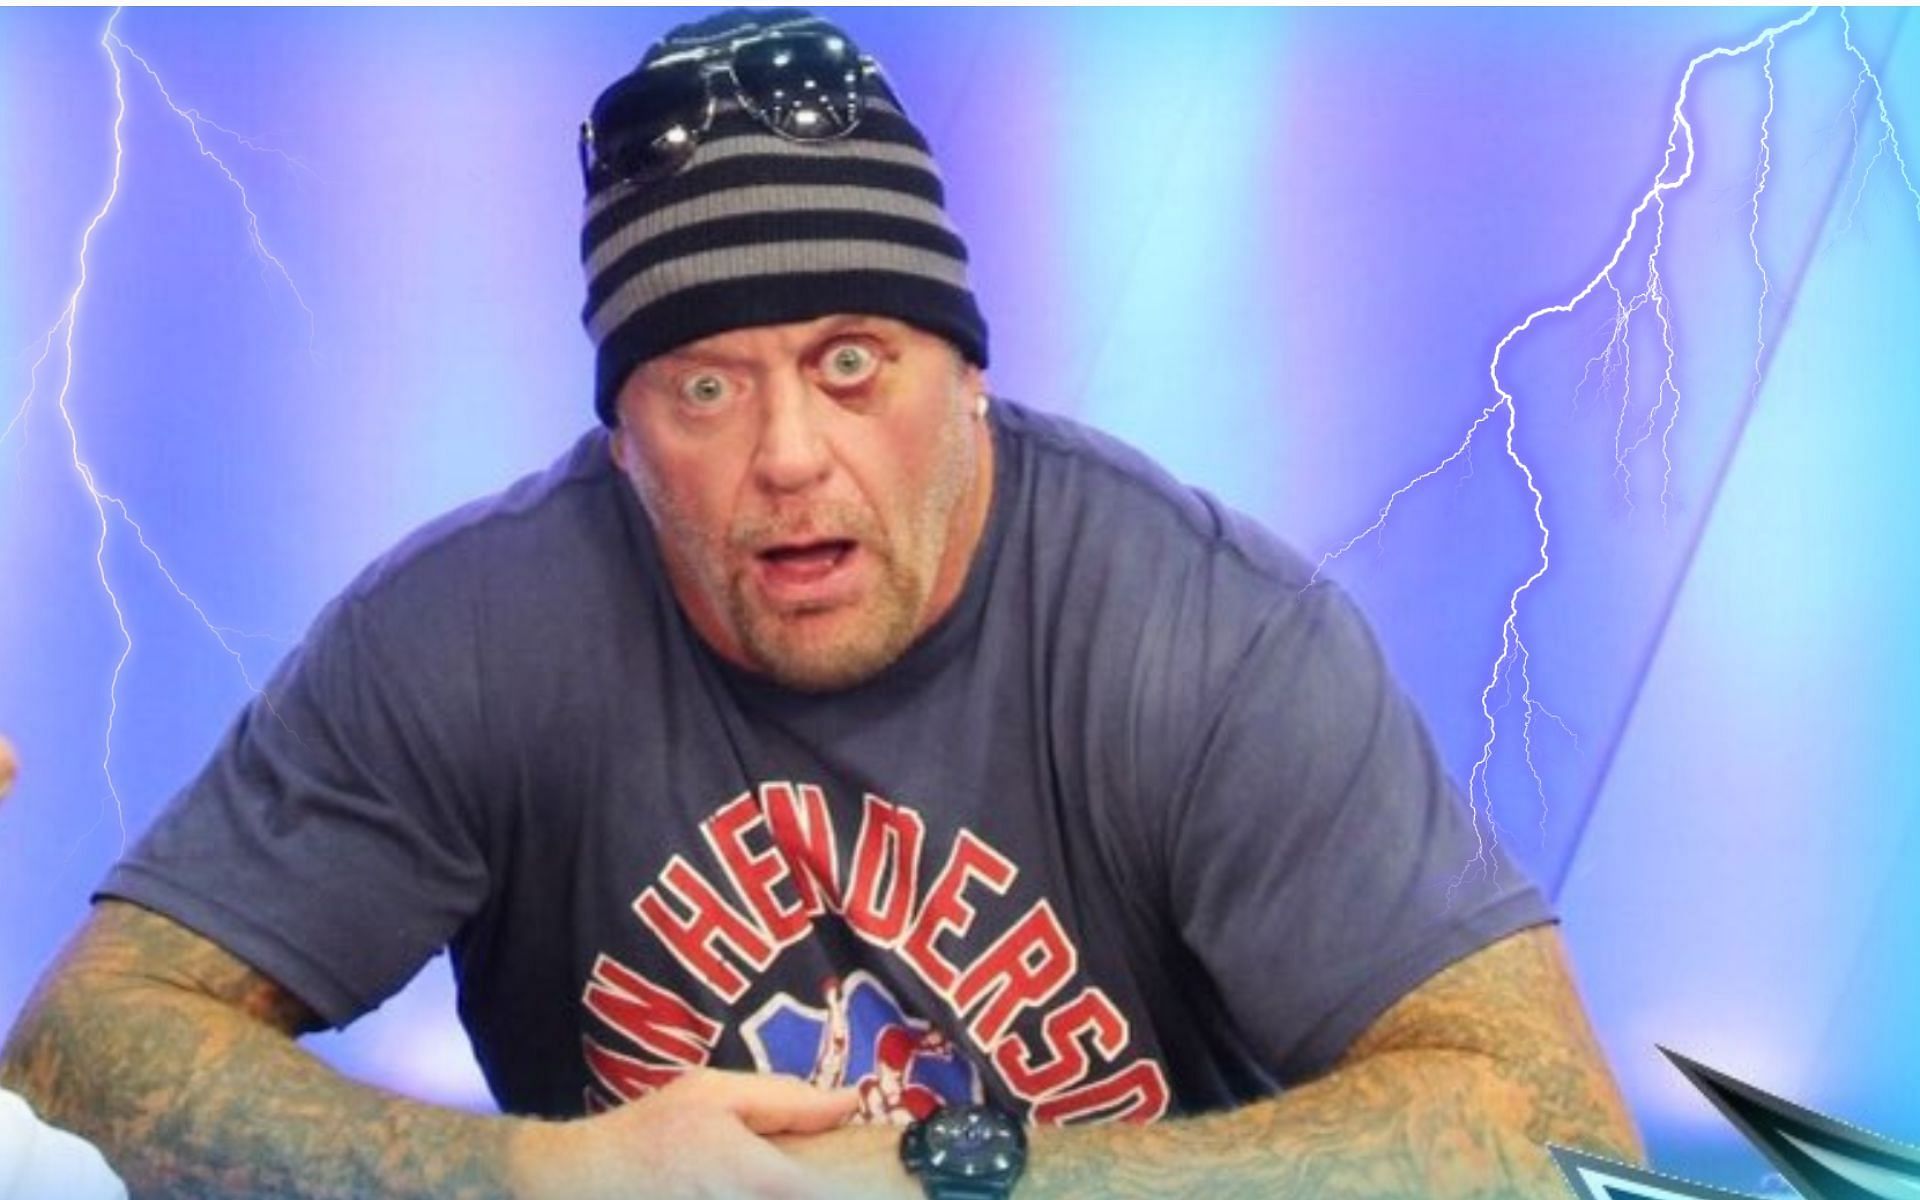 The Undertaker is a global icon!